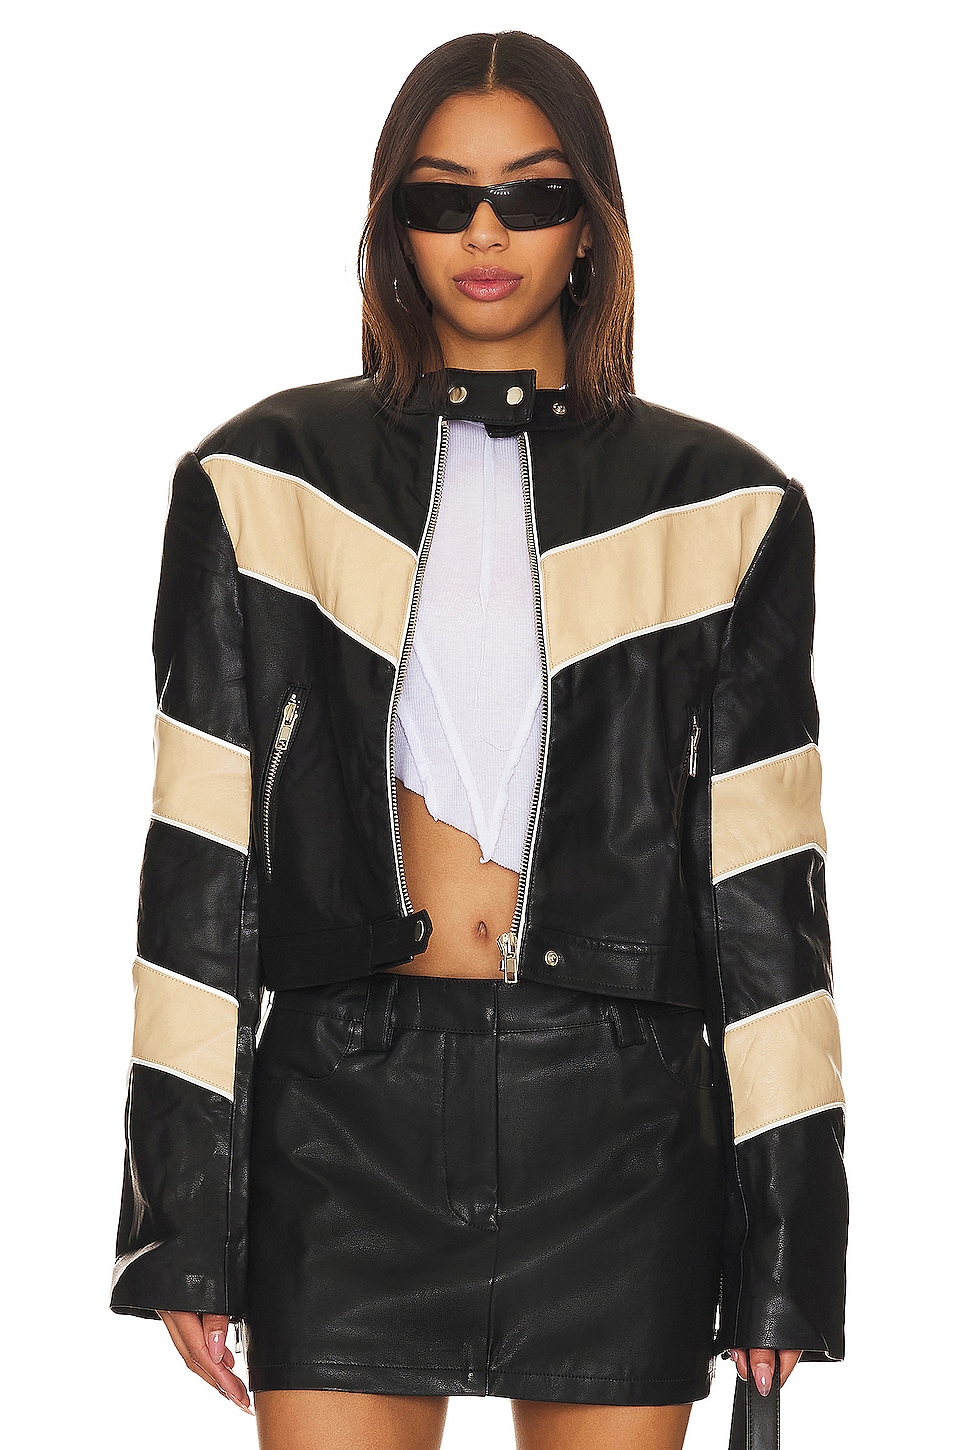 BY.DYLN Tobaias Faux Leather Moto Jacket in Black | REVOLVE